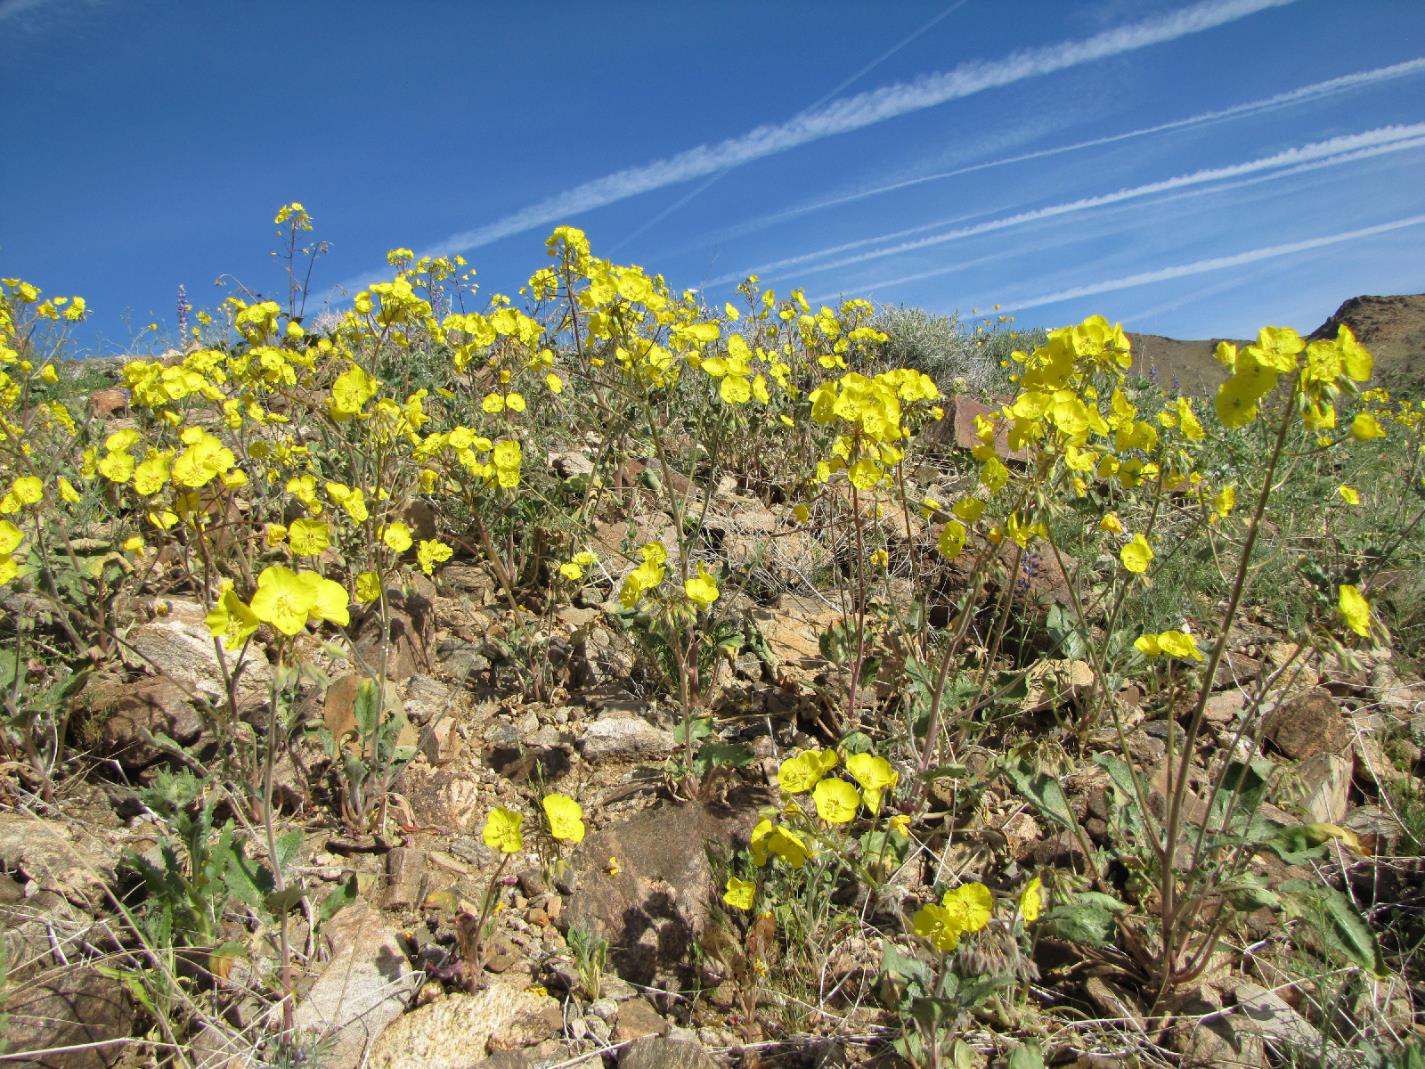 groups of yellow flowers grow under a blue sky